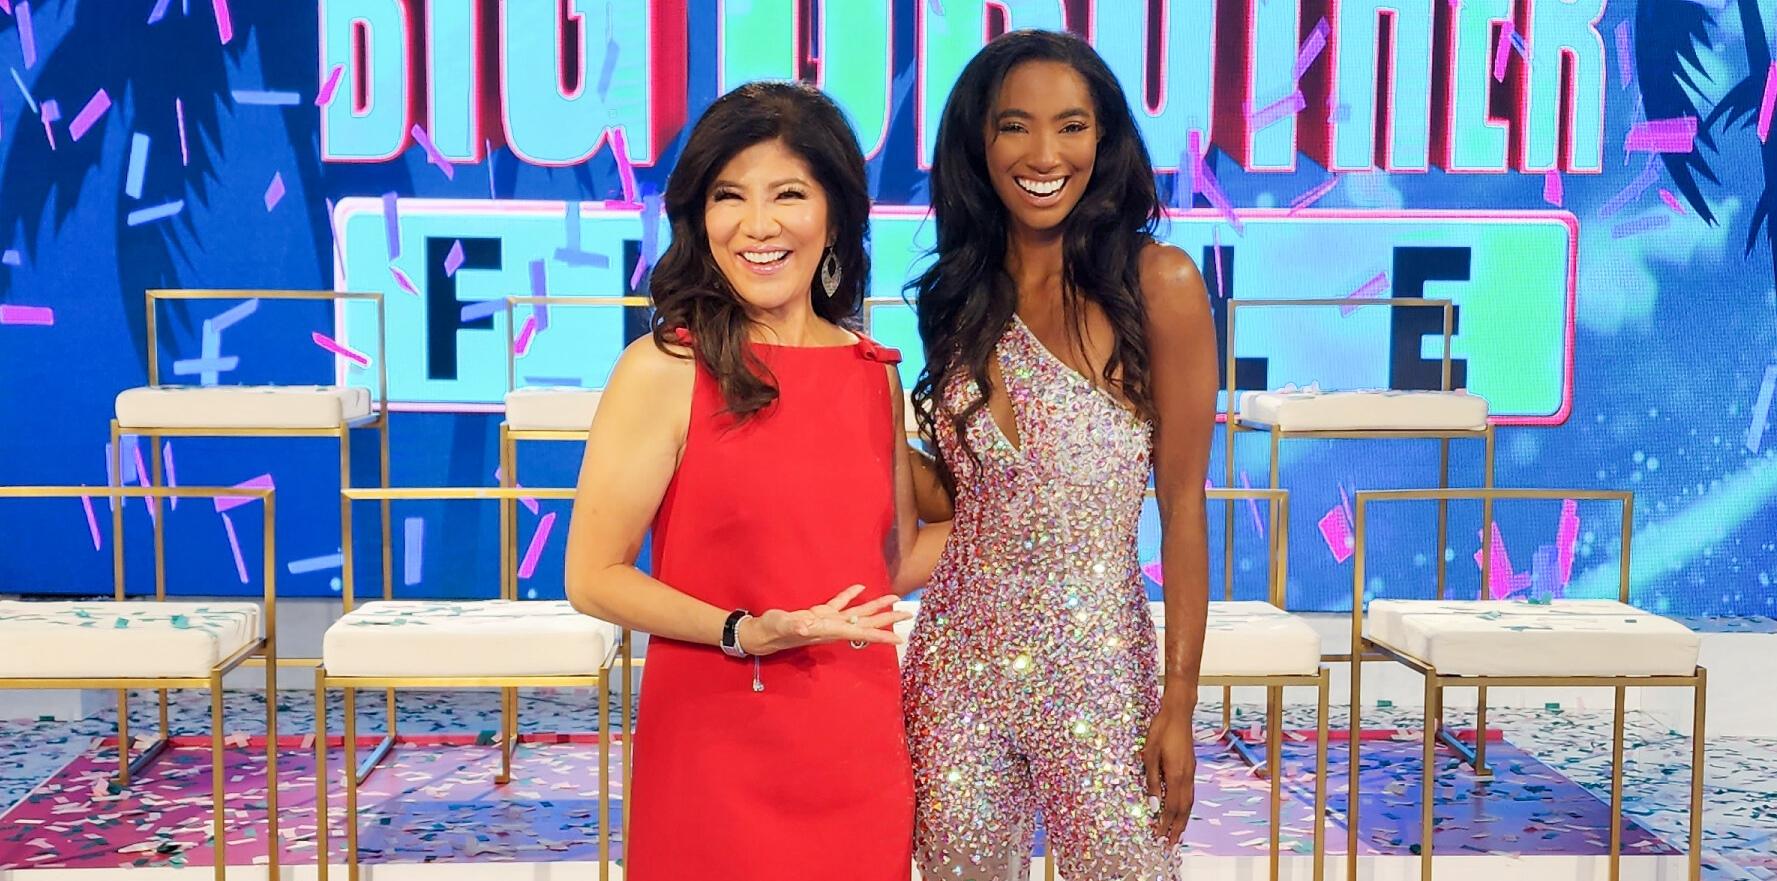 Julie Chen and Taylor Hale appear in the 'Big Brother' Season 24 finale